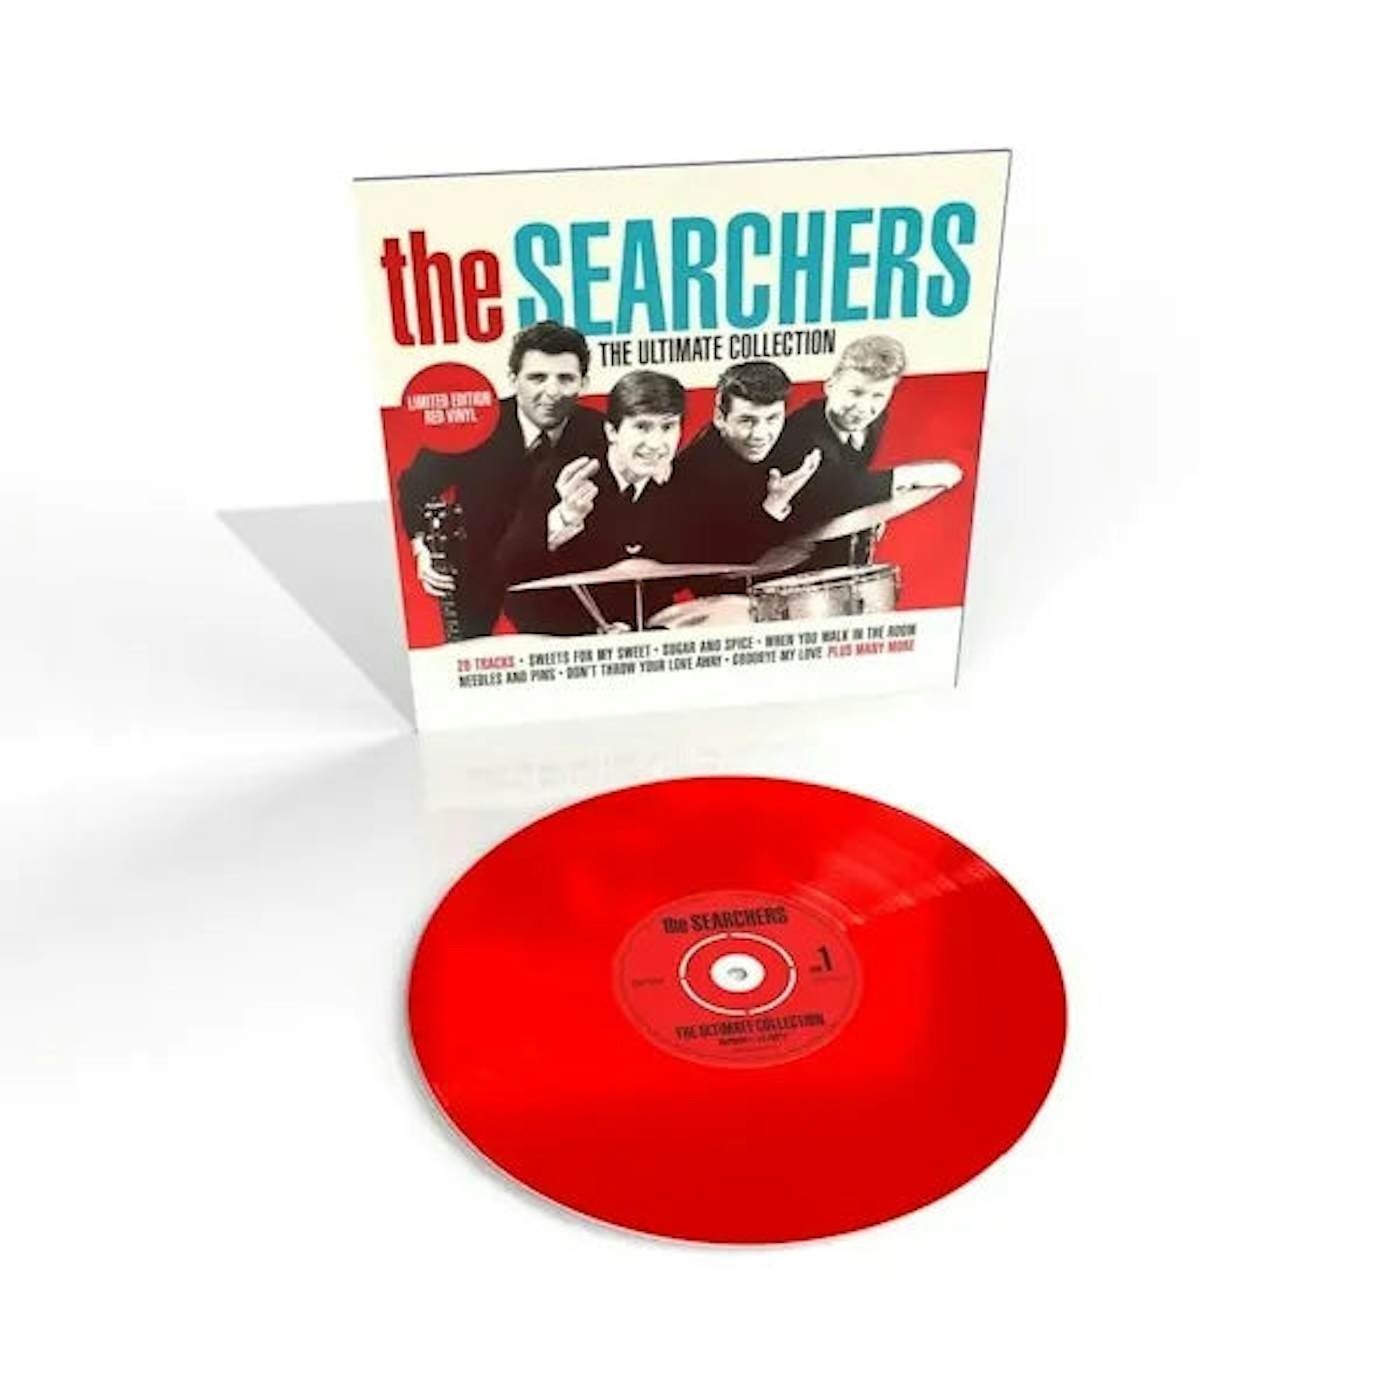 The Searchers - The Ultimate Collection (Vinyl)